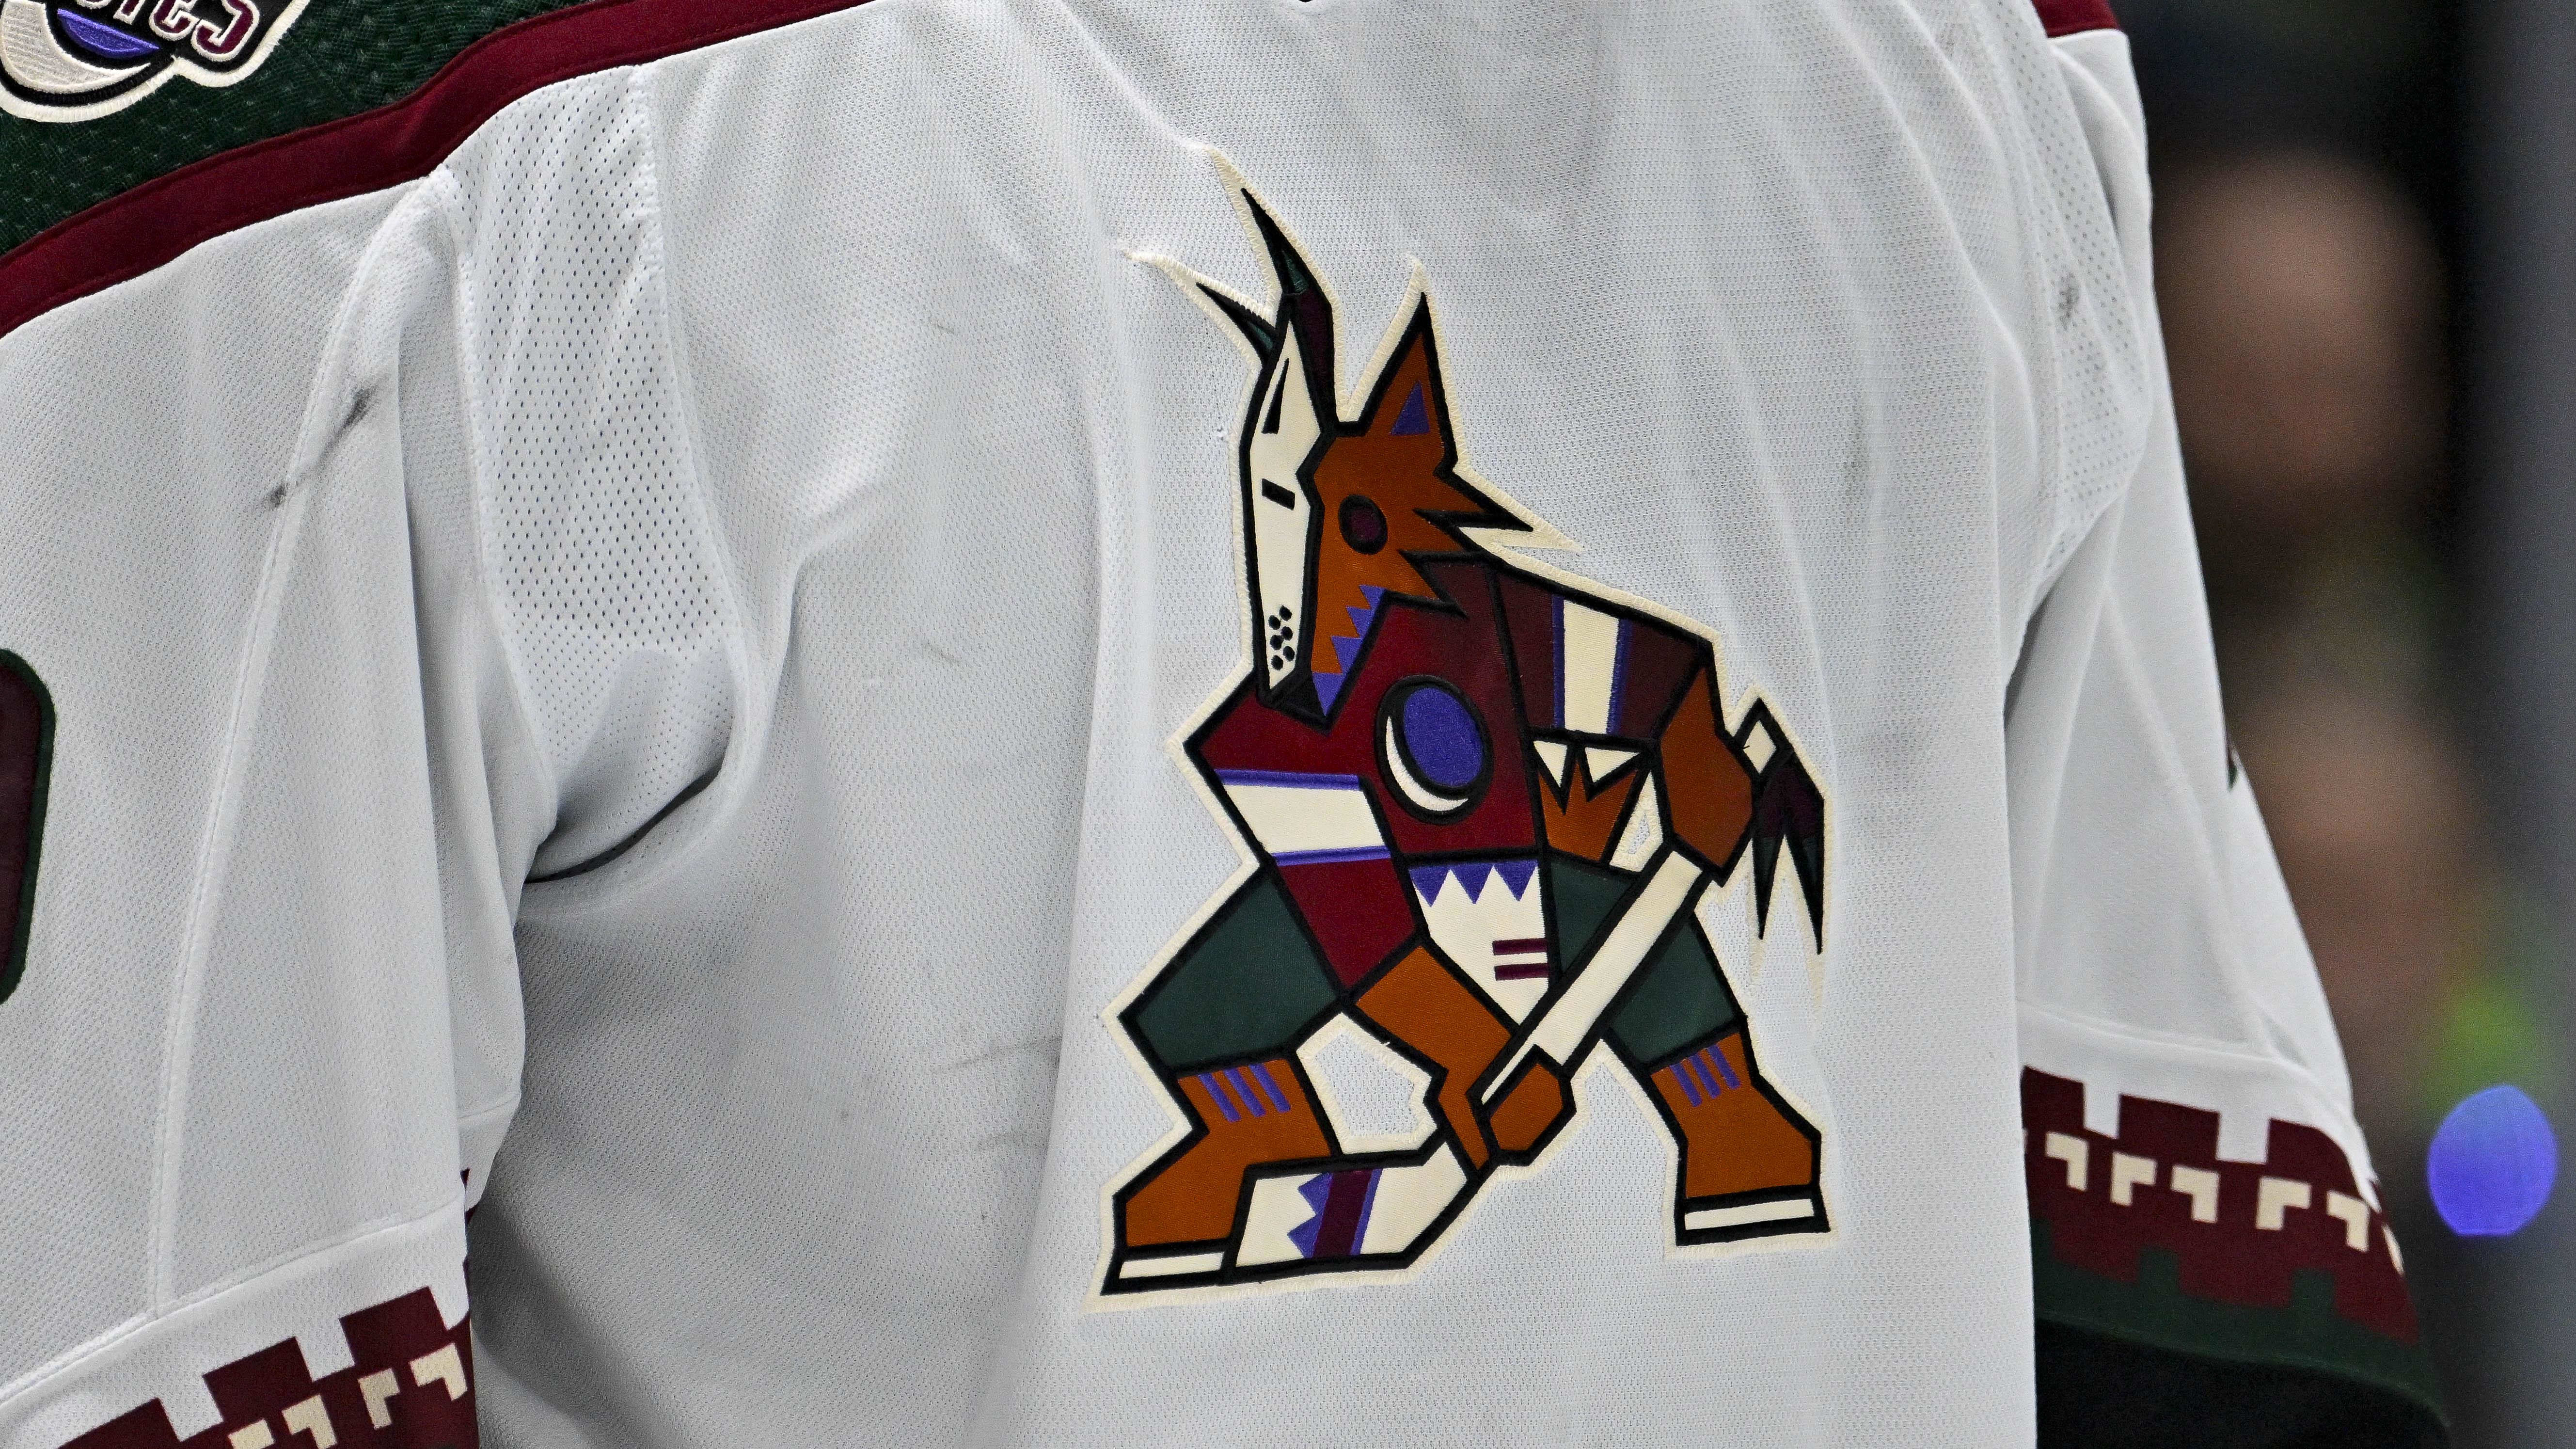 Closeup view of the Arizona Coyotes’ kachina logo on the front of a jersey